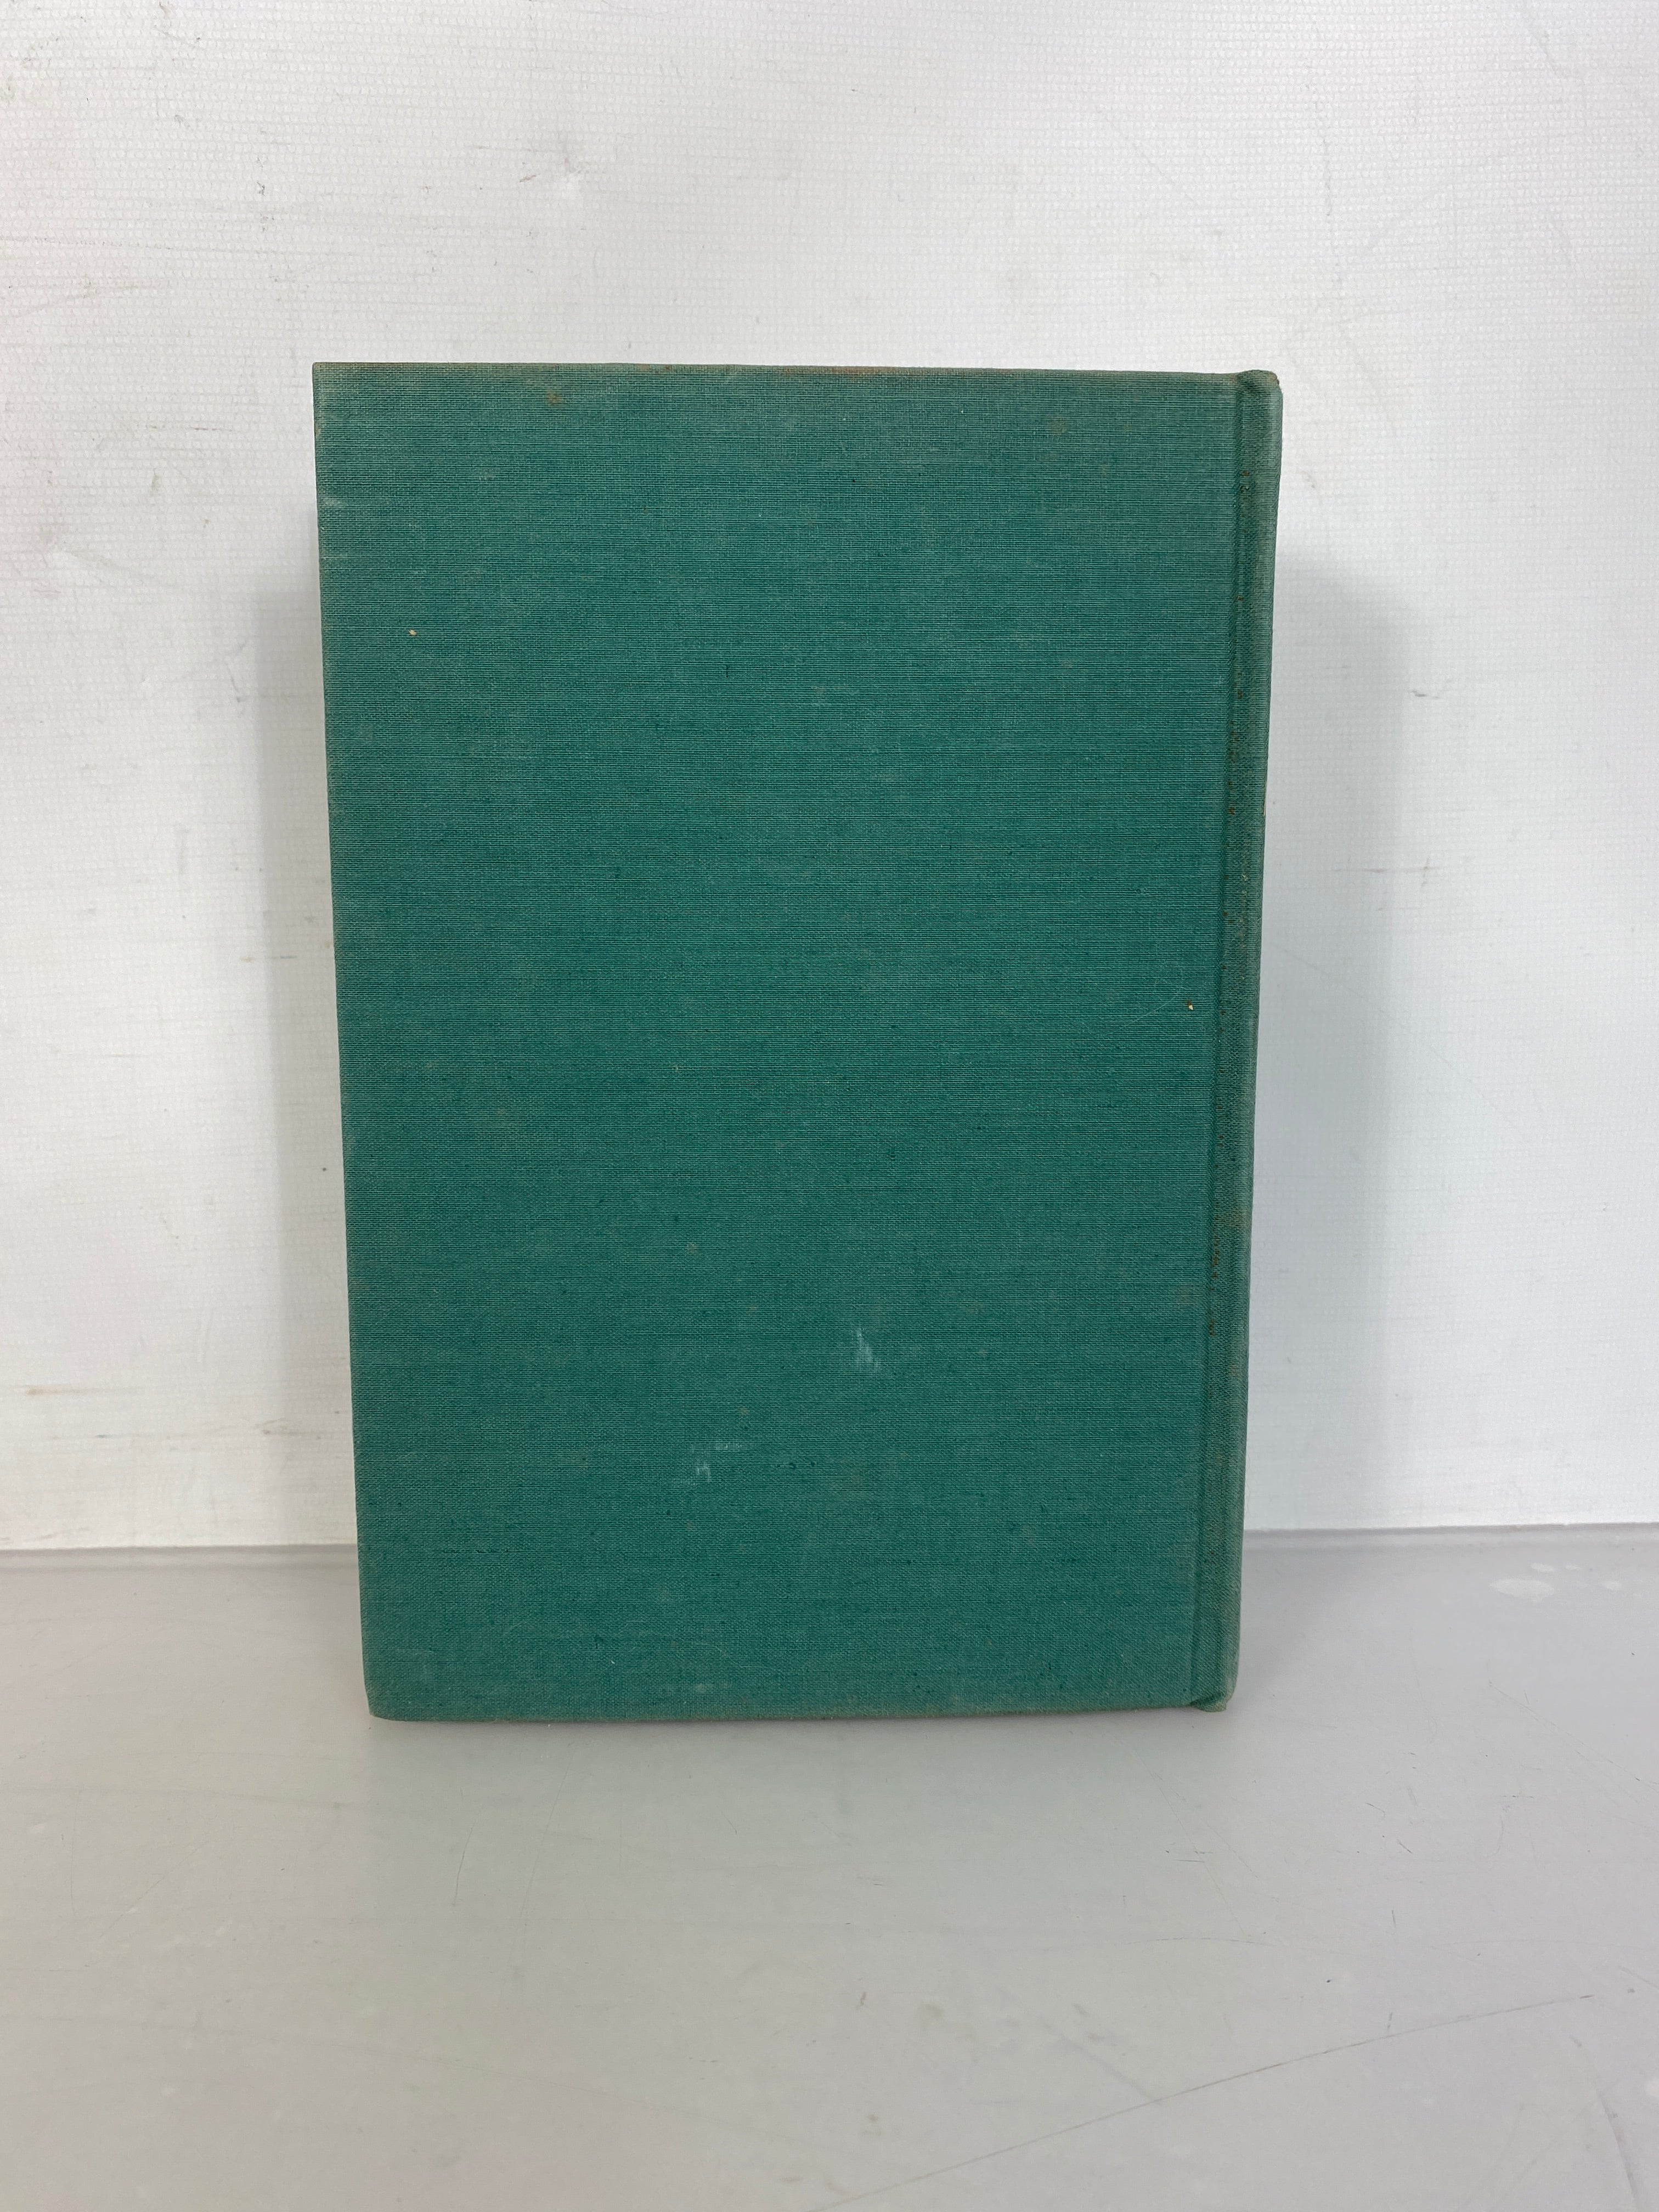 Back to Mandalay by Lowell Thomas Signed Vintage Copy 1951 HC